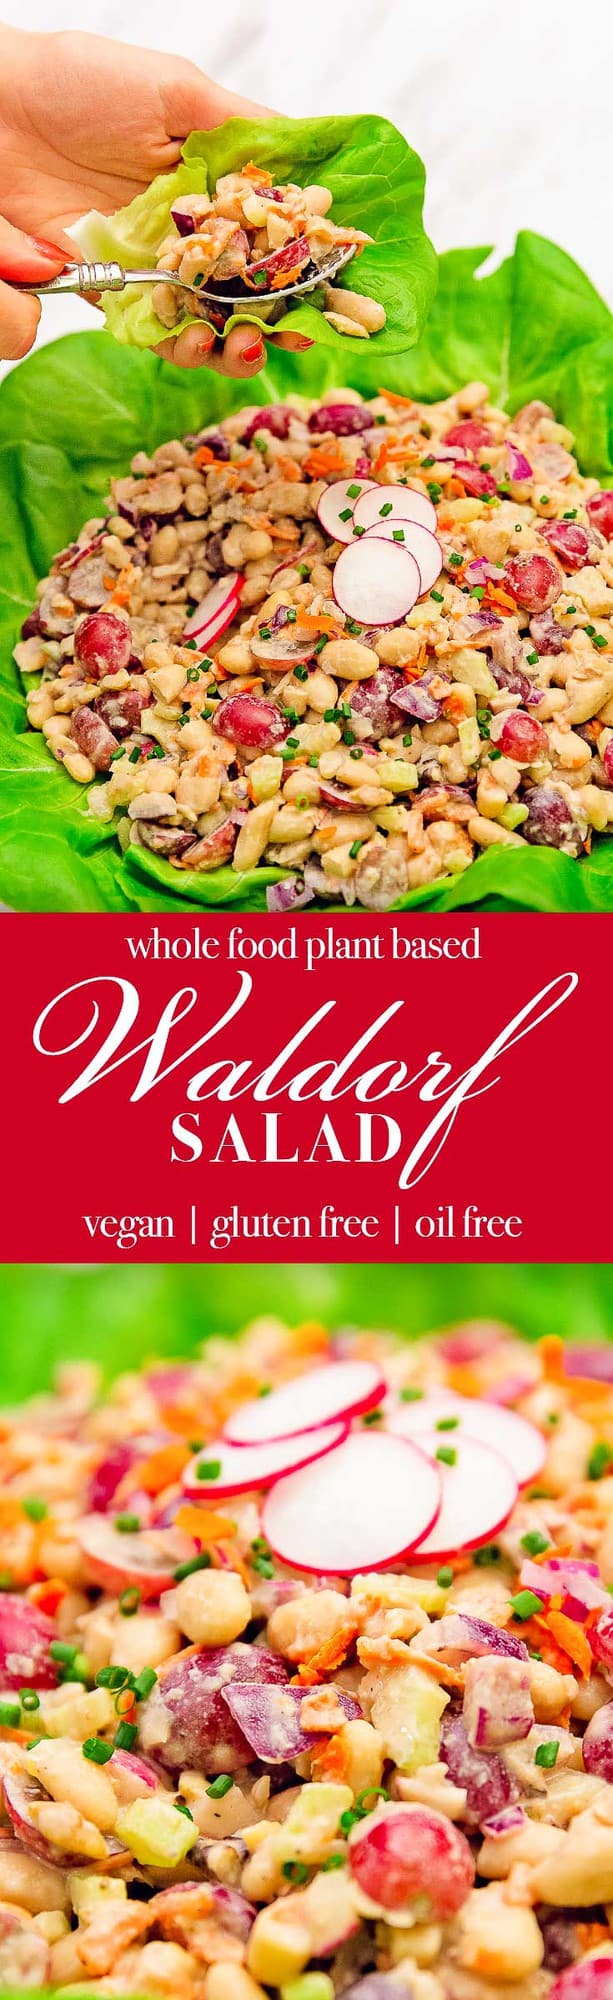 Waldorf salad, salad, white beans, grapes, walnuts, tahini, vegan, vegetarian, whole food plant based, gluten free, recipe, wfpb, healthy, oil free, no refined sugar, no oil, refined sugar free, lunch, dinner, side, sauce, easy, fast, quick, dinner party, entertaining, picnic, fun salad, lettuce cups, lettuce wraps, dinner party, holiday, special, Thanksgiving salad, Christmas salad